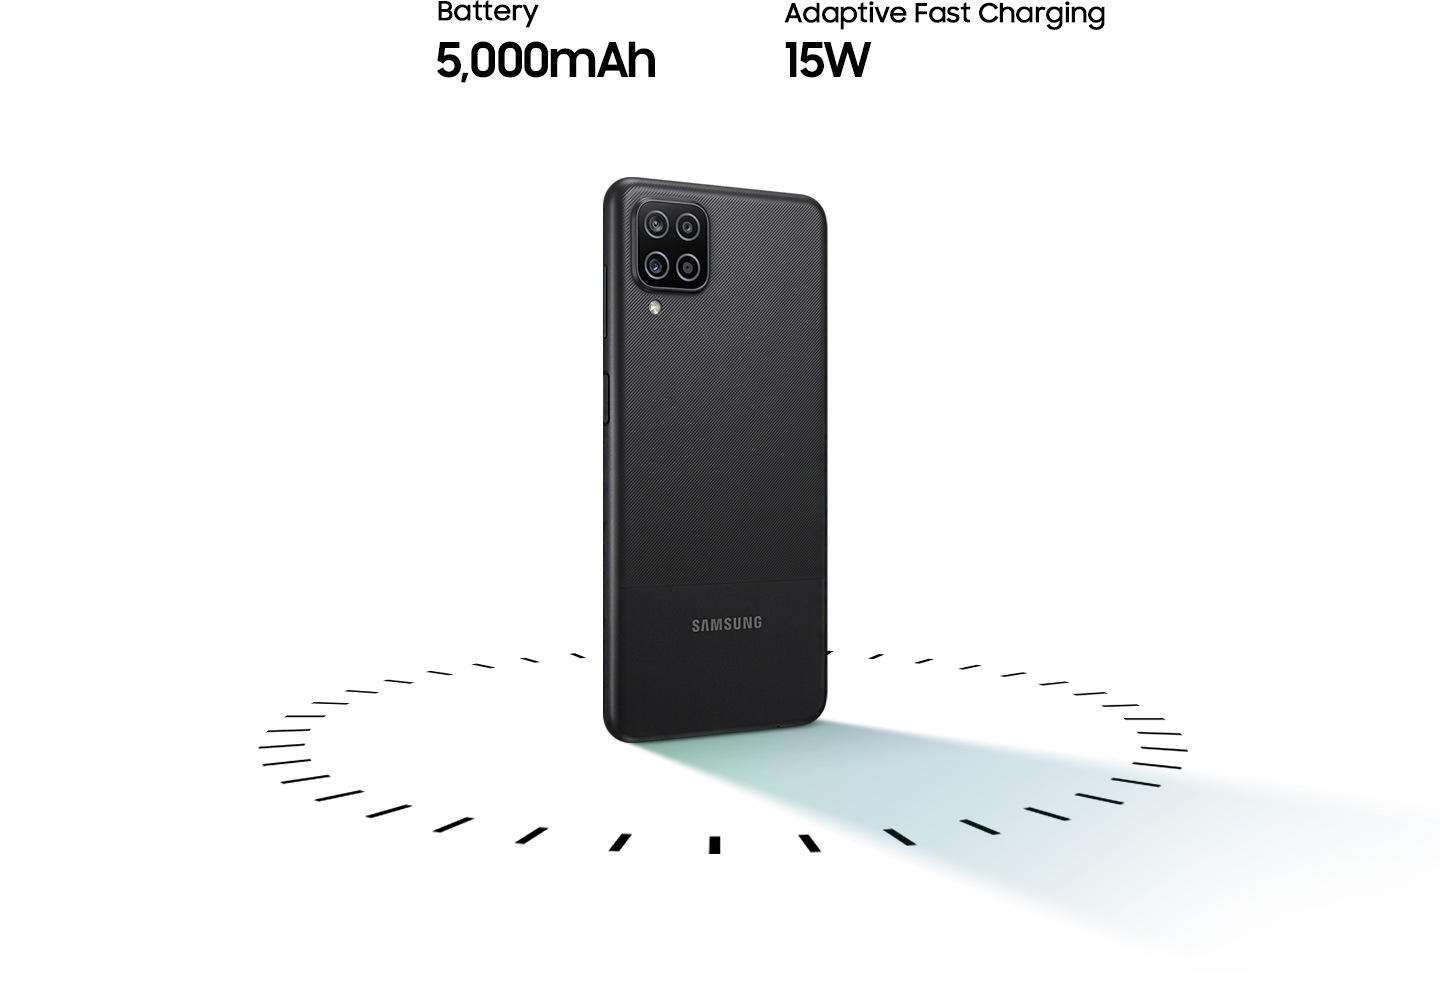 Read the user review on Samsung Galaxy A12 battery specs. Samsung Galaxy A12 stands up, surrounded by circular dots, with the text of 5,000mAh Battery and 15W Adaptive Fast charging.